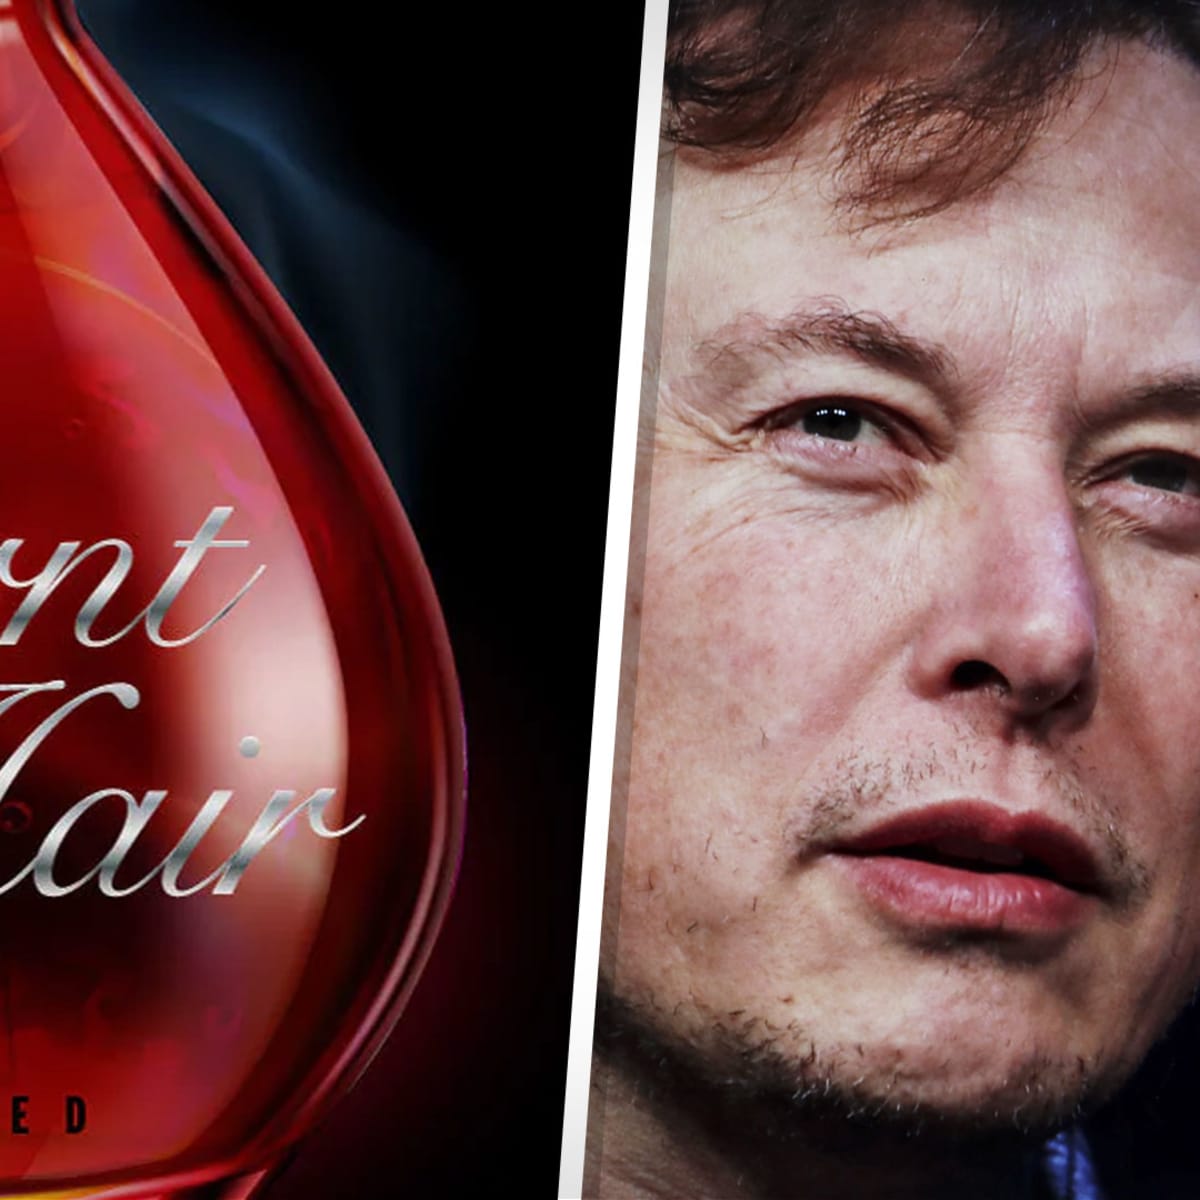 Elon Musk Peddles Burnt Hair Perfume Fails to Deliver on HighSpeed  Trains